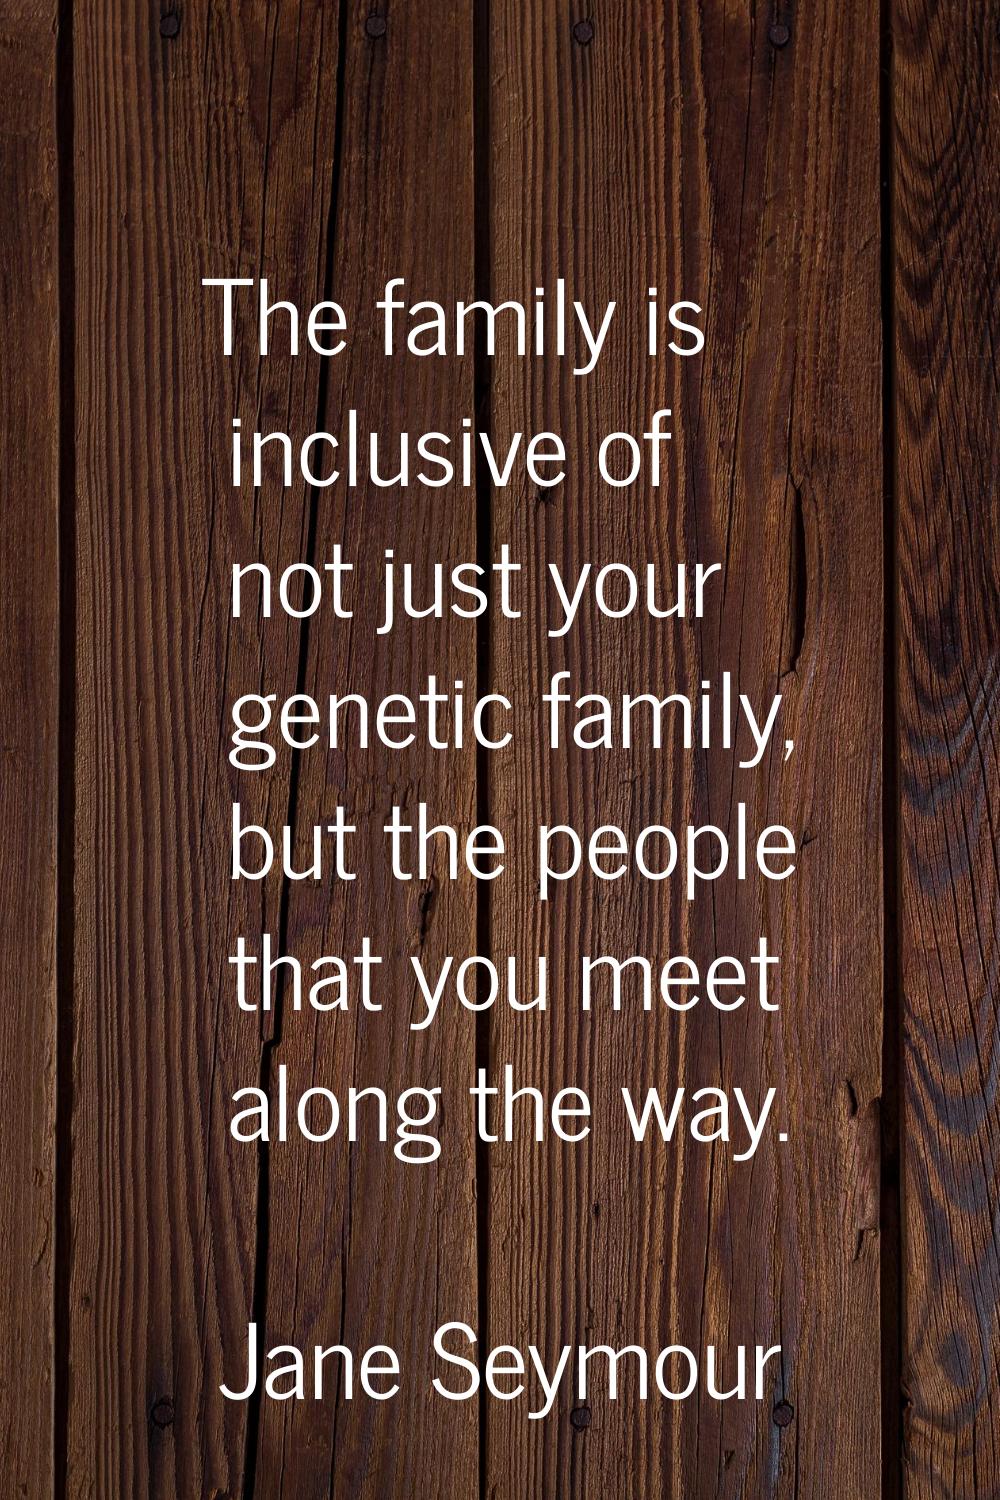 The family is inclusive of not just your genetic family, but the people that you meet along the way